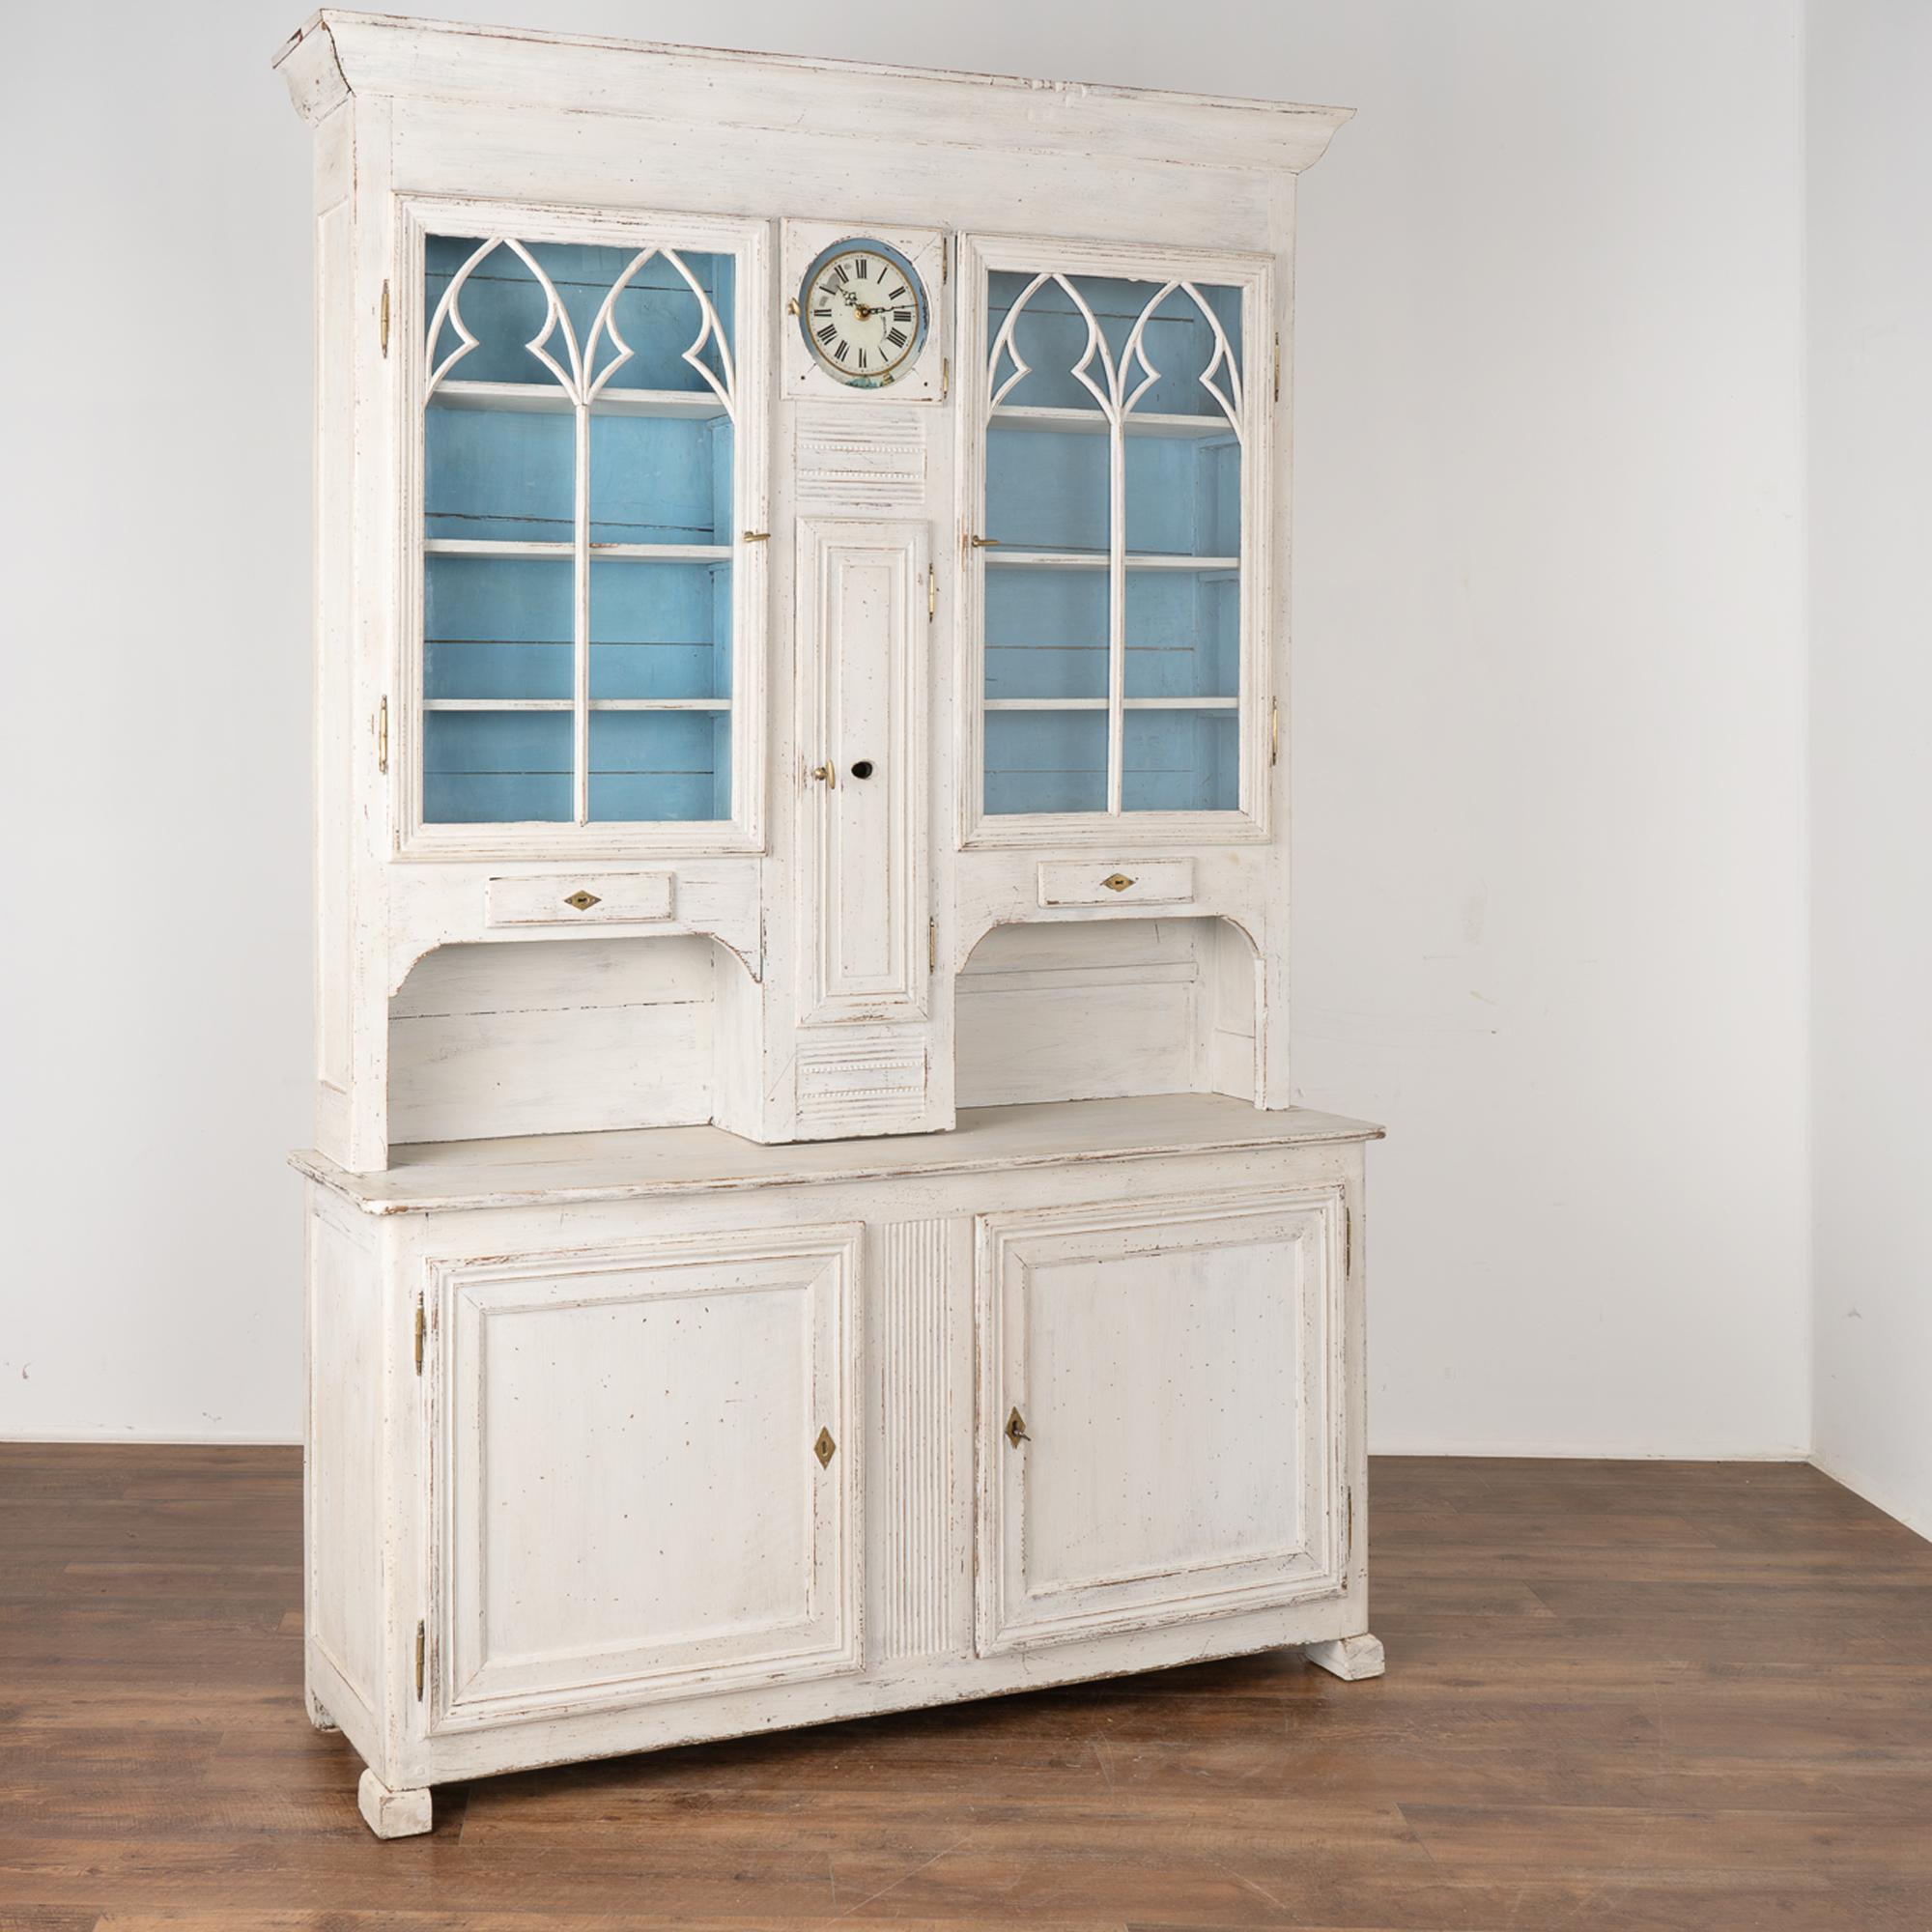 This delightful pine storage cabinet still displays the original clock face in the upper section with decorative carved molding accenting the glass doors.
The upper cupboard section has 3 removable shelves behind 2 glass doors and rests on the